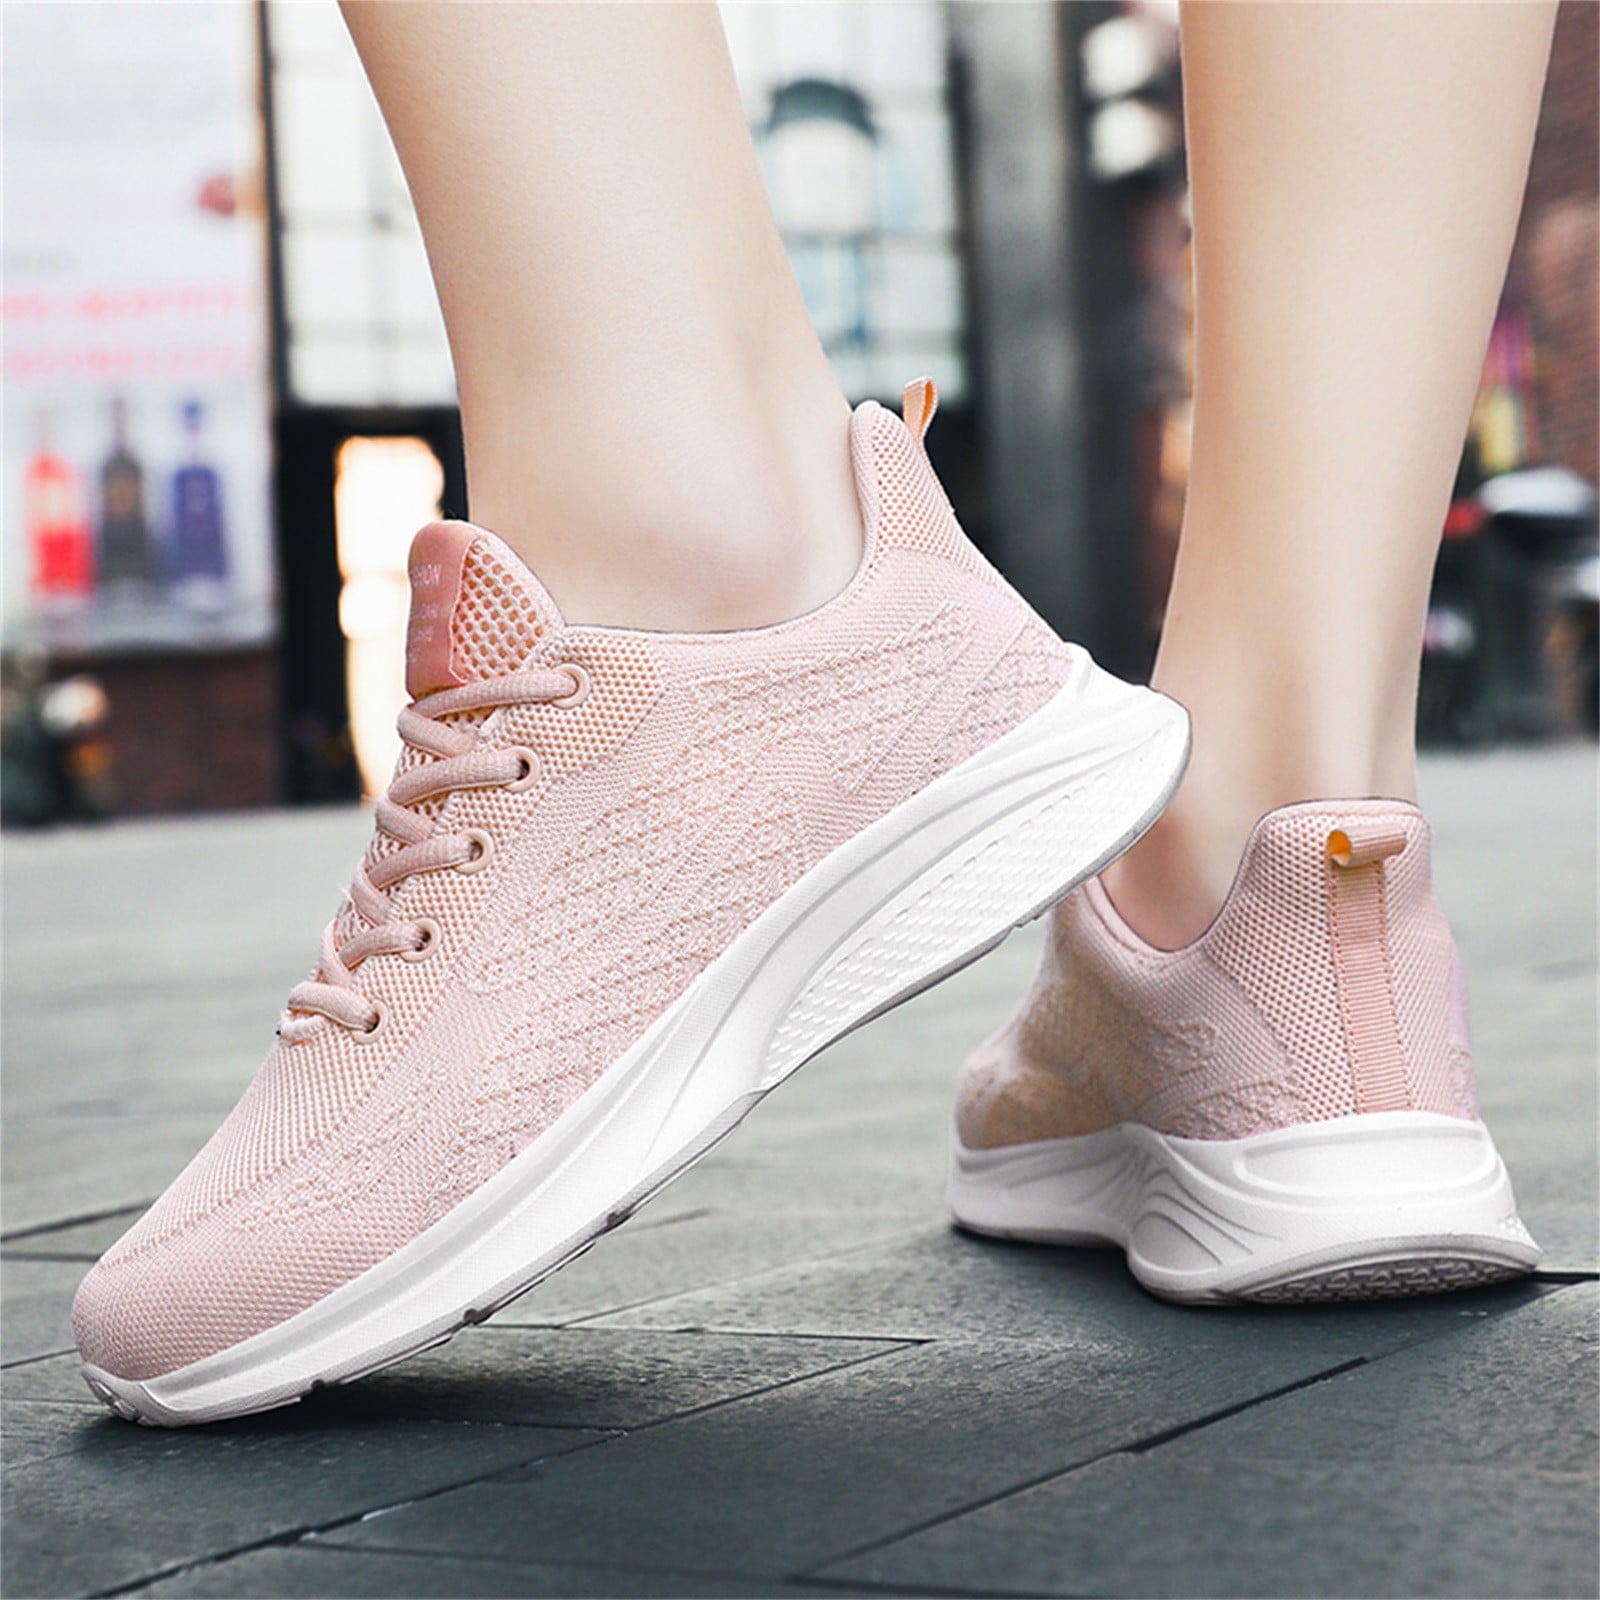 21 Comfortable and Stylish Nike Shoes to Shine - Fancy Ideas about  Hairstyles, Nails, Outfits, and Everything | Nike shoes women, Outfit  shoes, Sneakers fashion